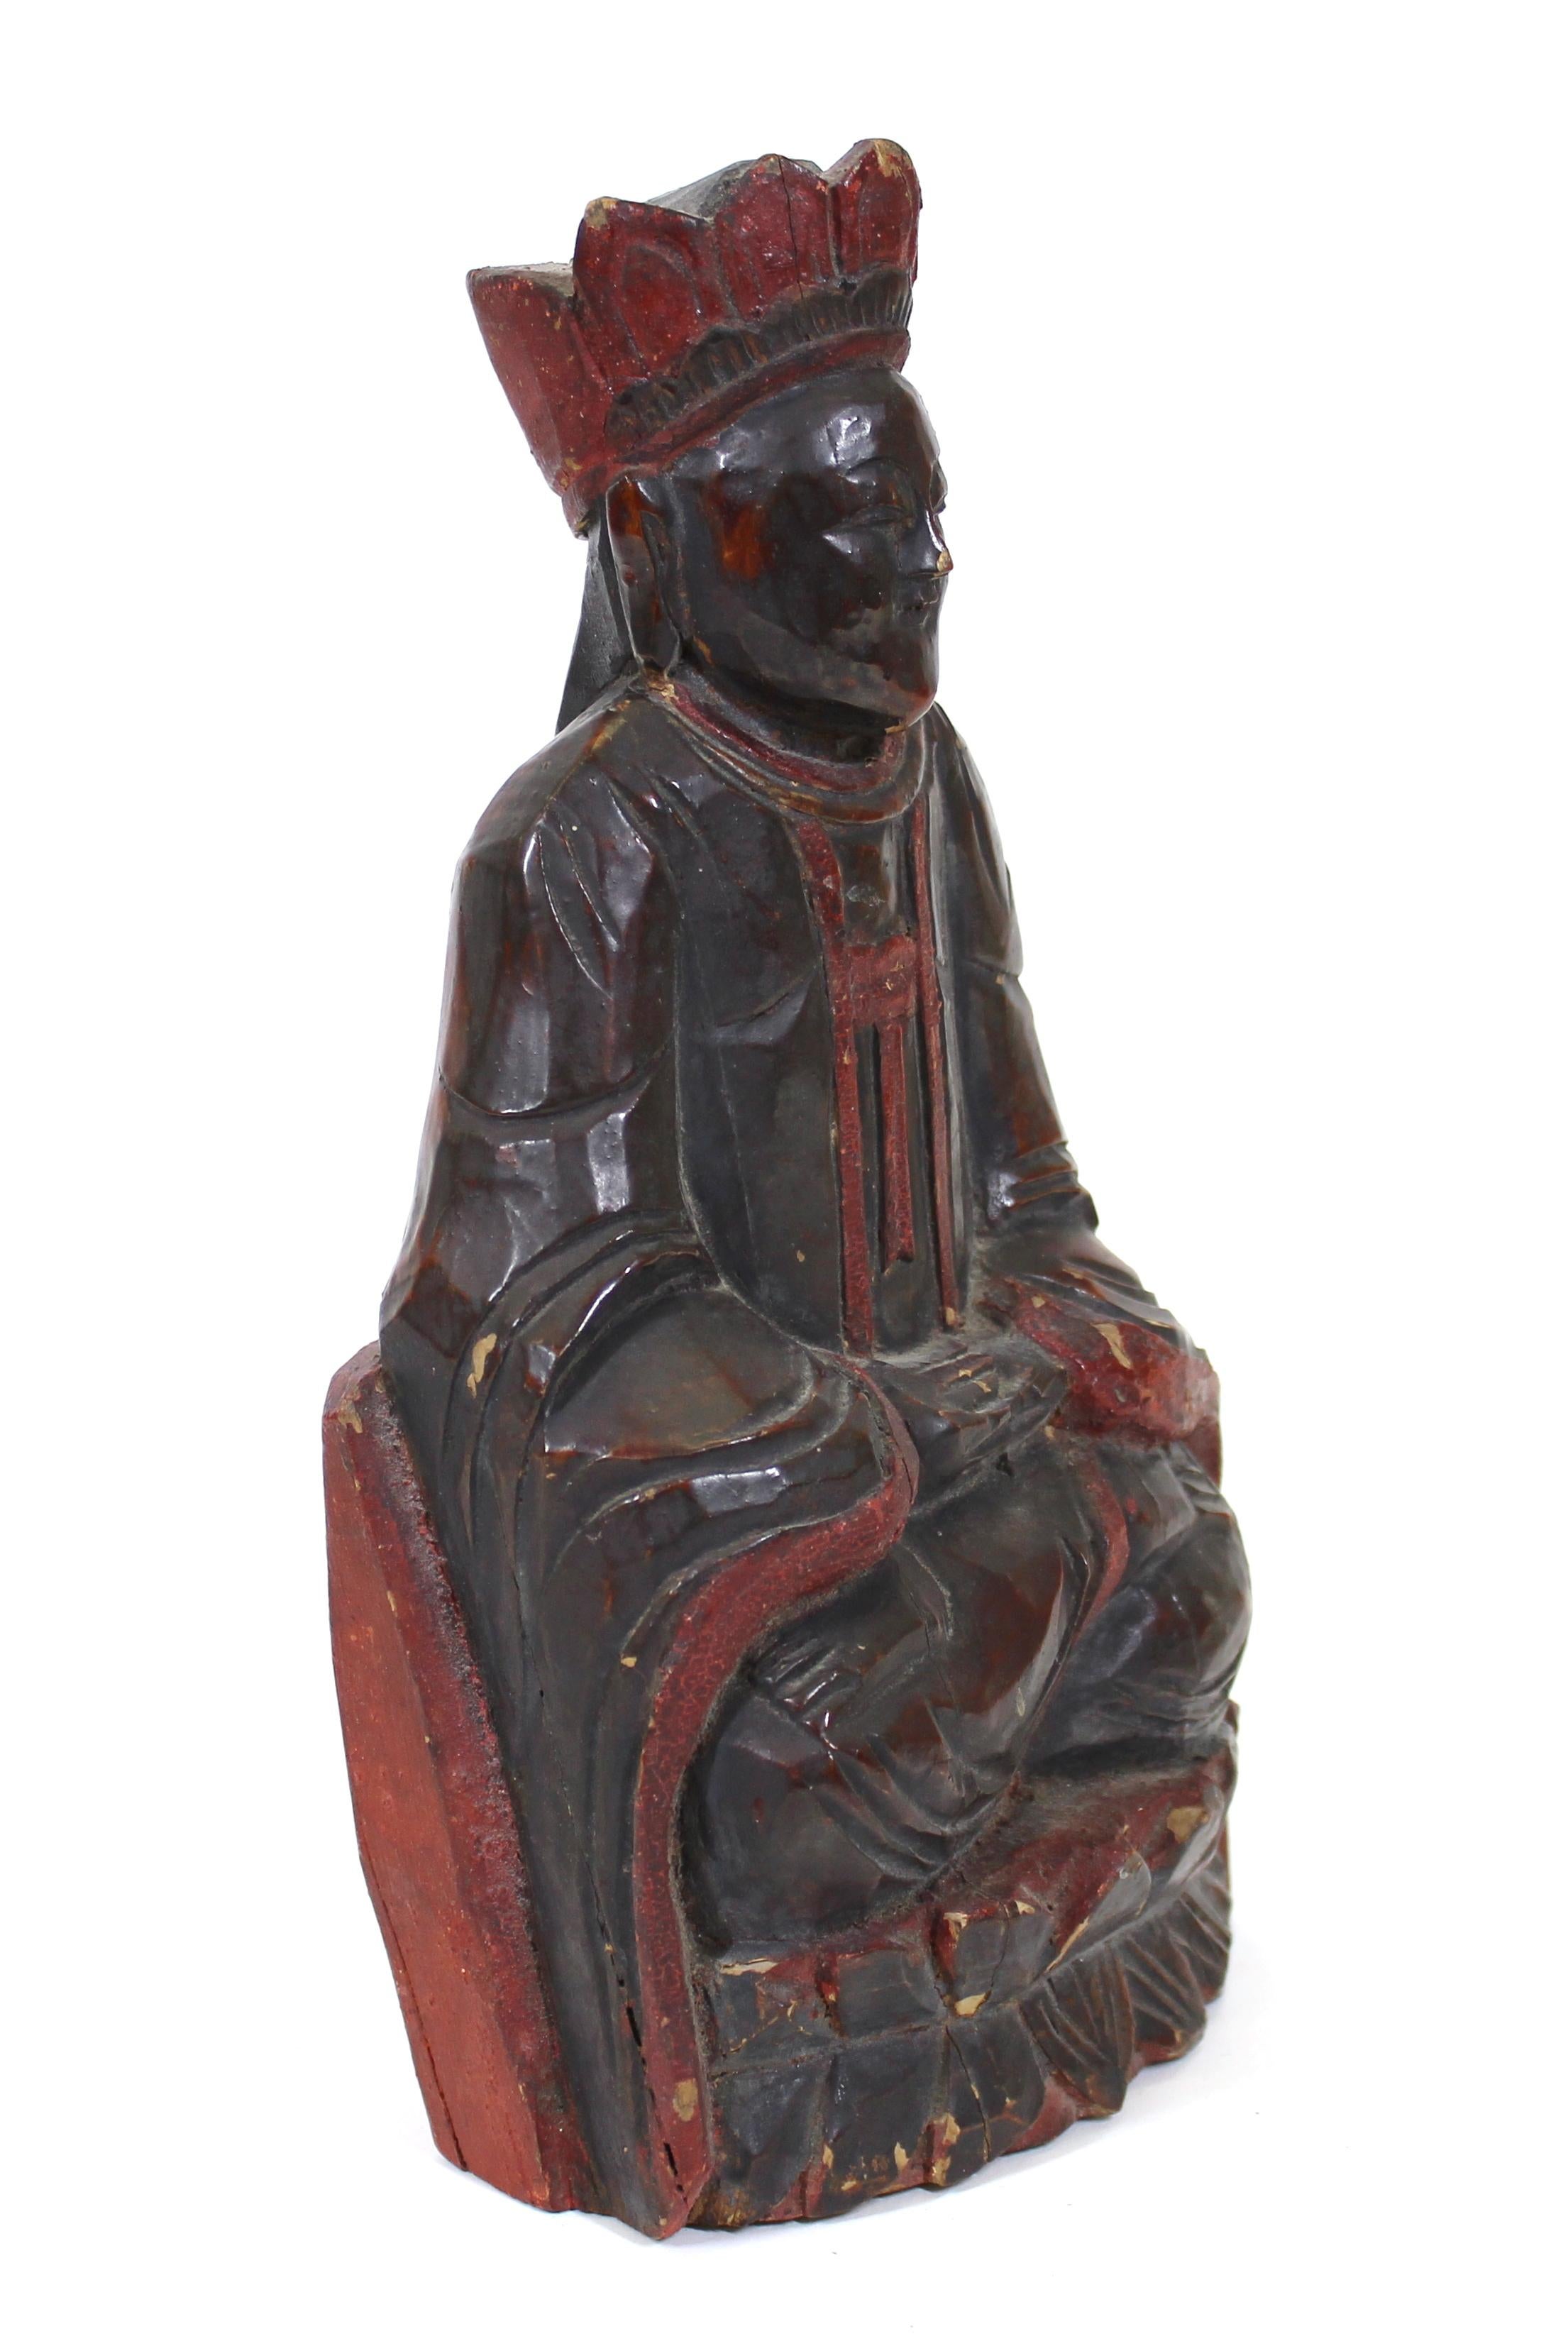 20th Century Chinese Carved Wood Reliquary Seated Dignitary Figure